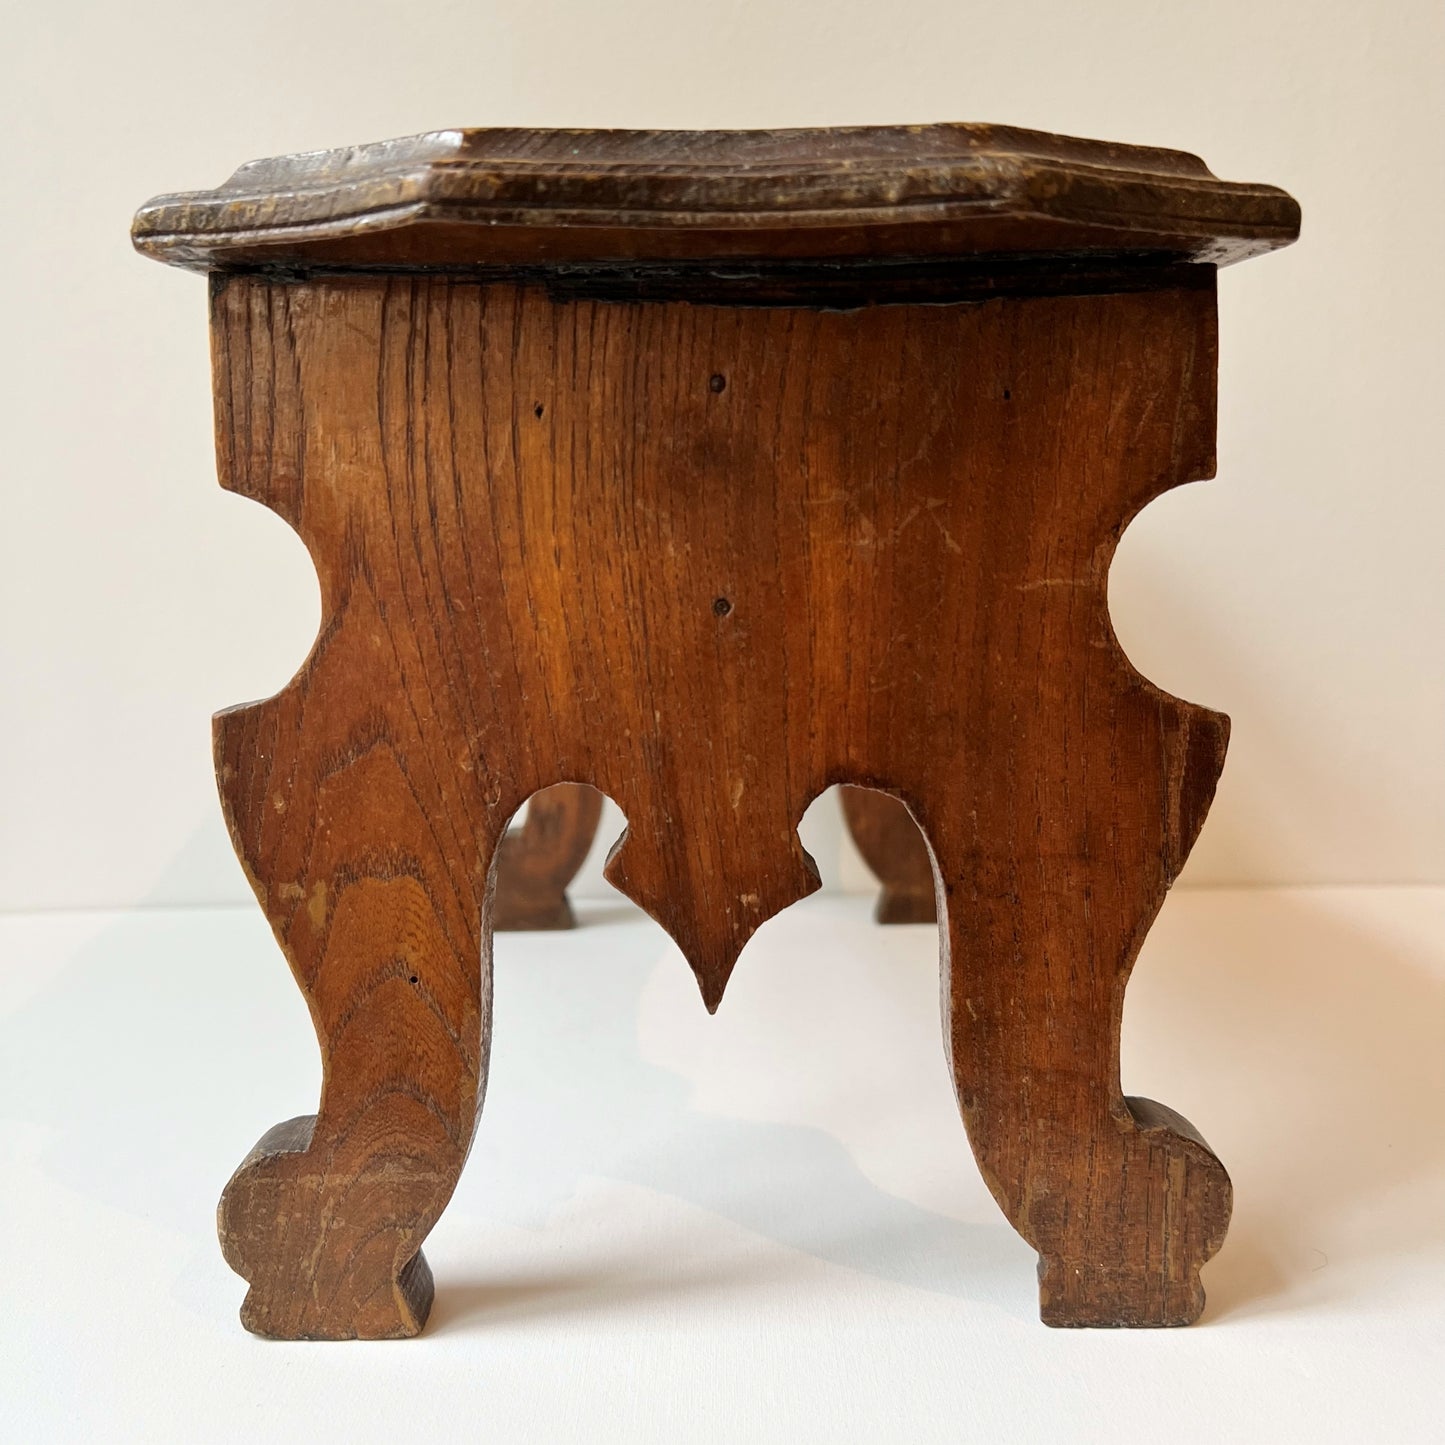 【Vintage】France - 1950s Small Wooden Stand B